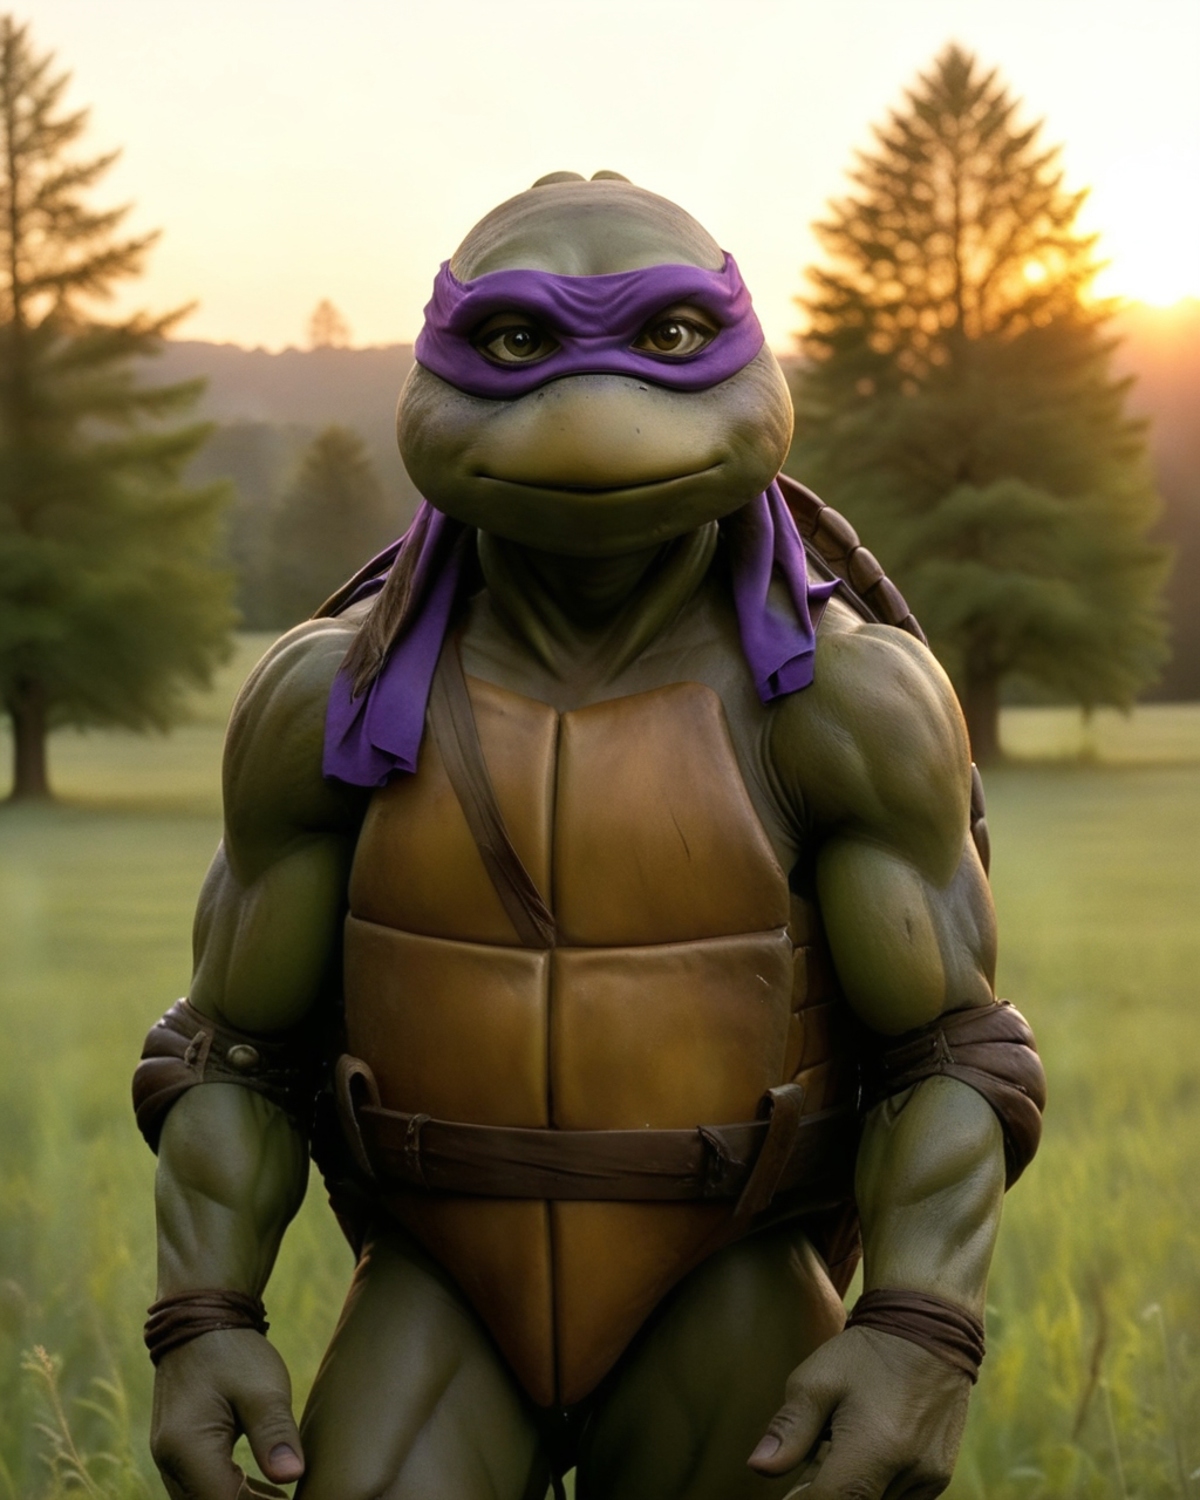 A large, muscular Teenage Mutant Ninja Turtle statue standing in a grassy field.